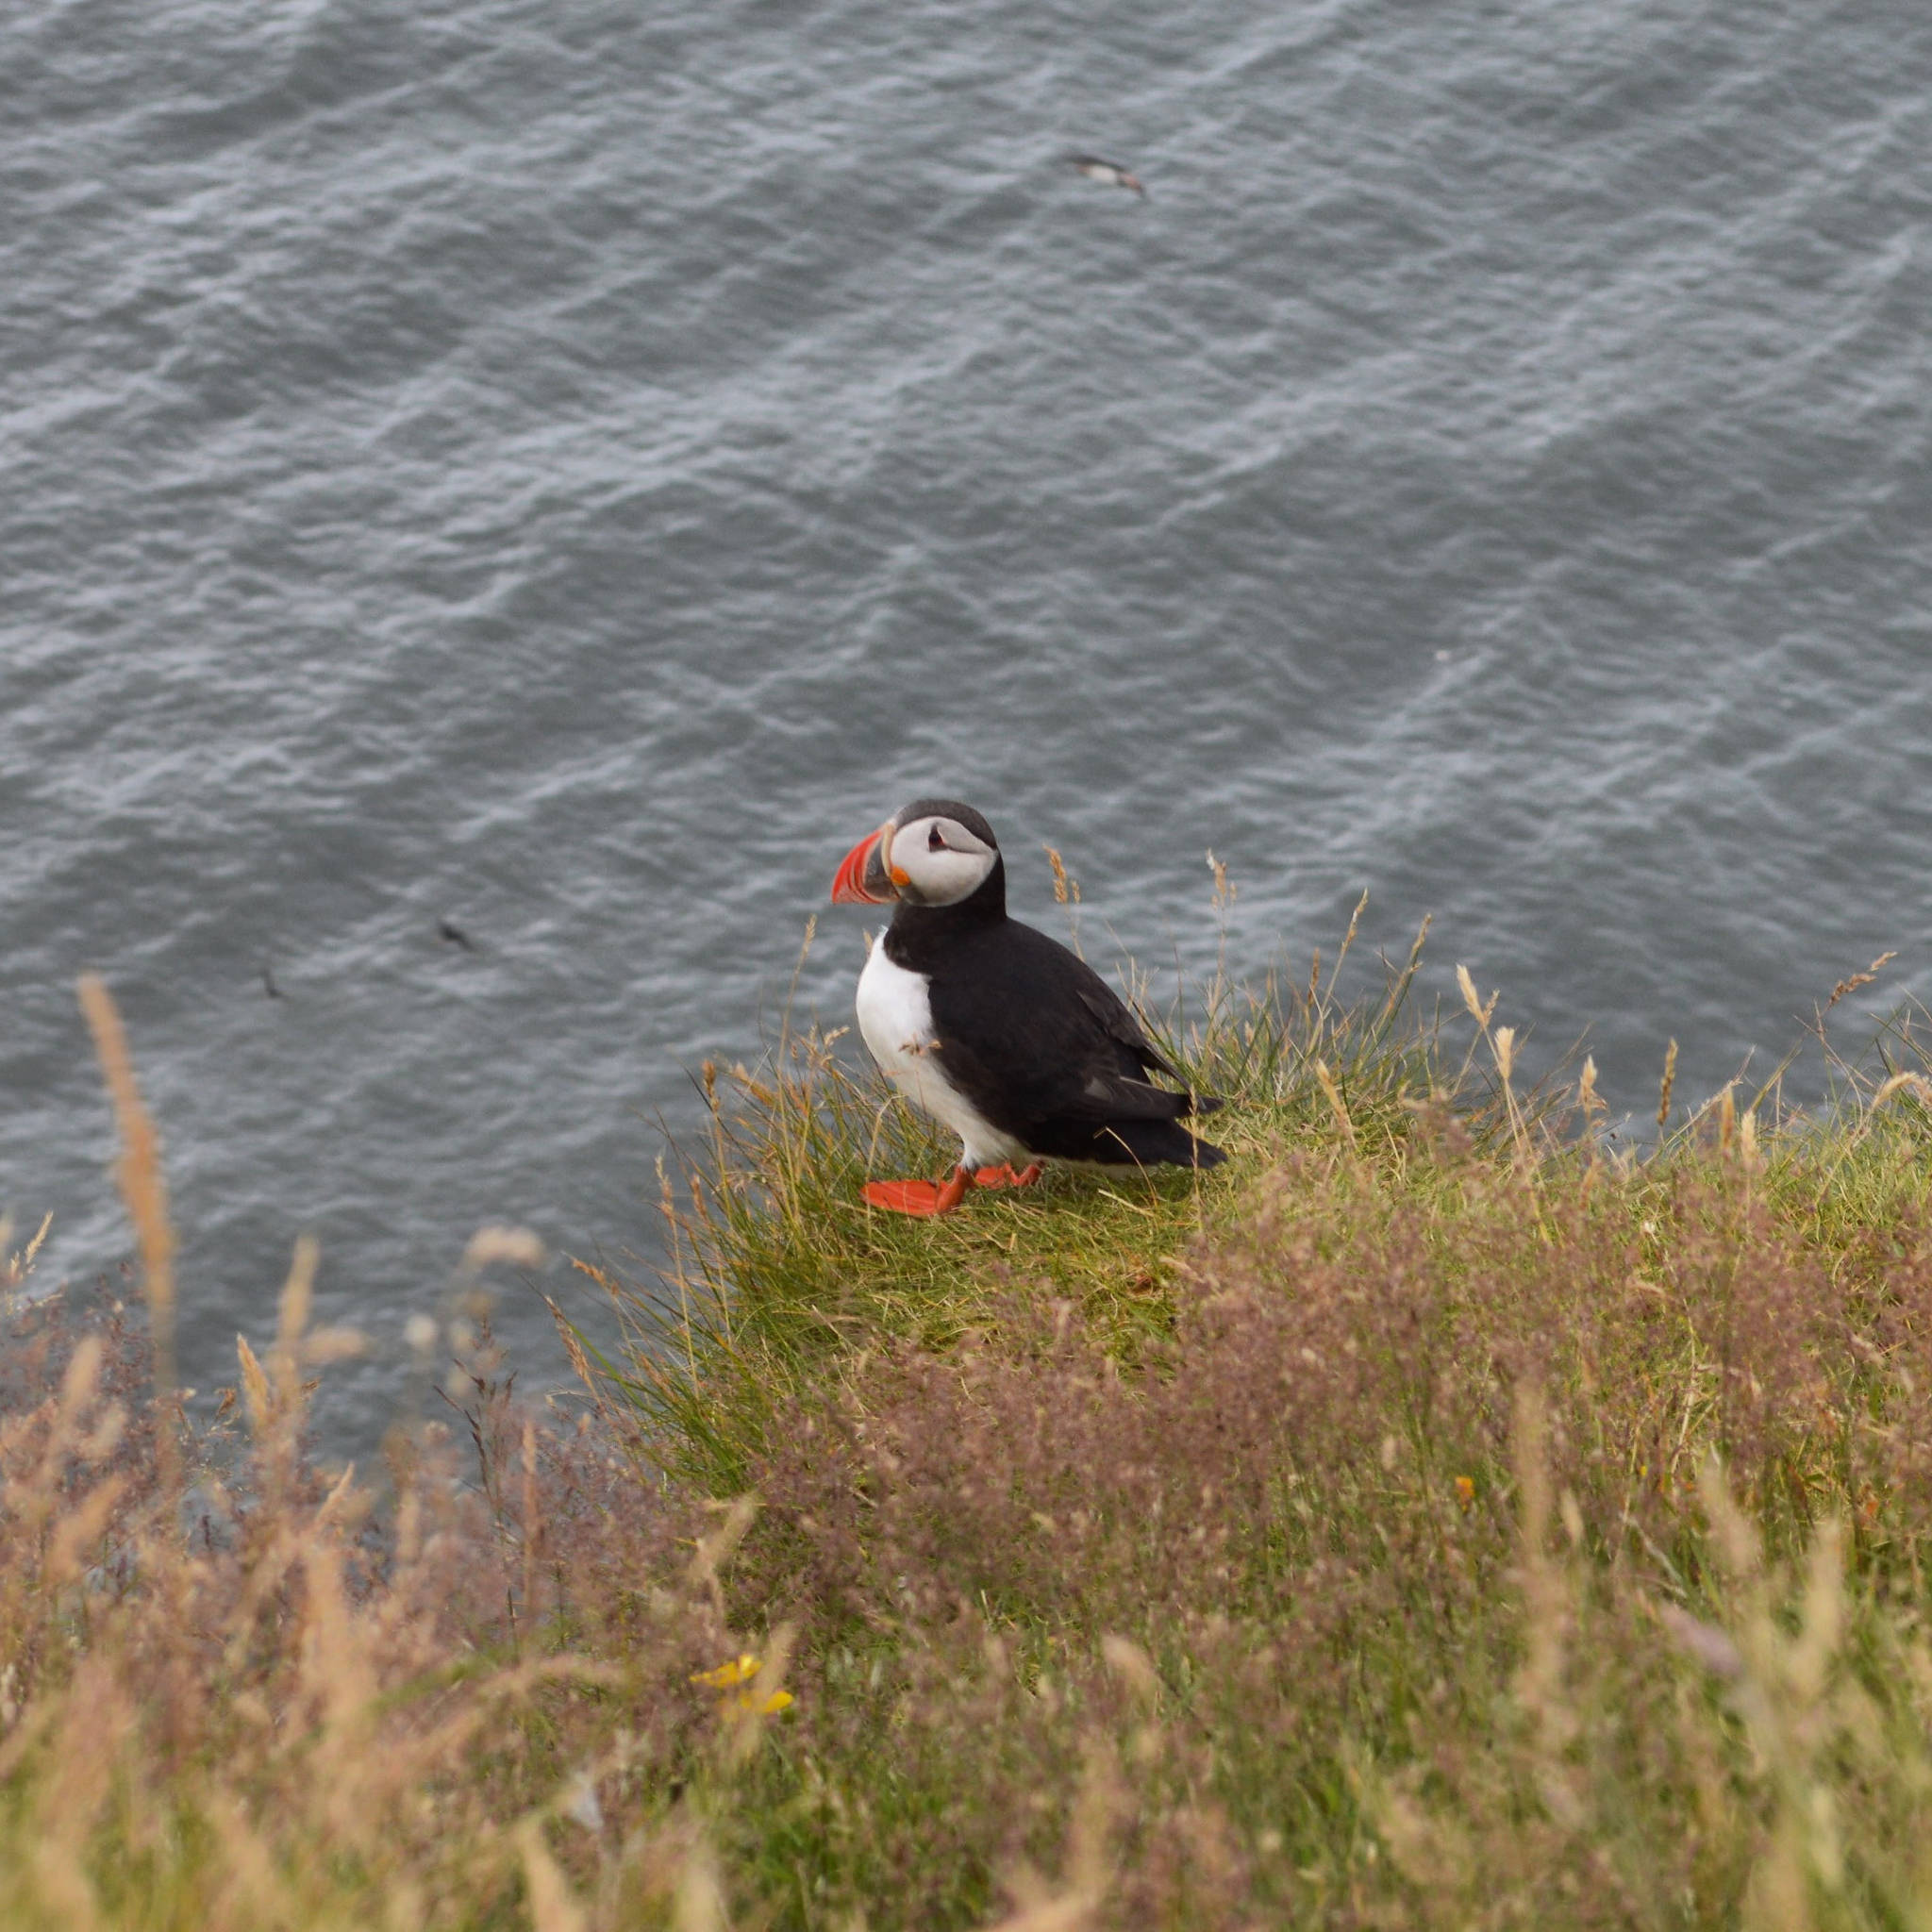 Bucket List day trips from Reykjavik, Iceland - Puffins in Vik